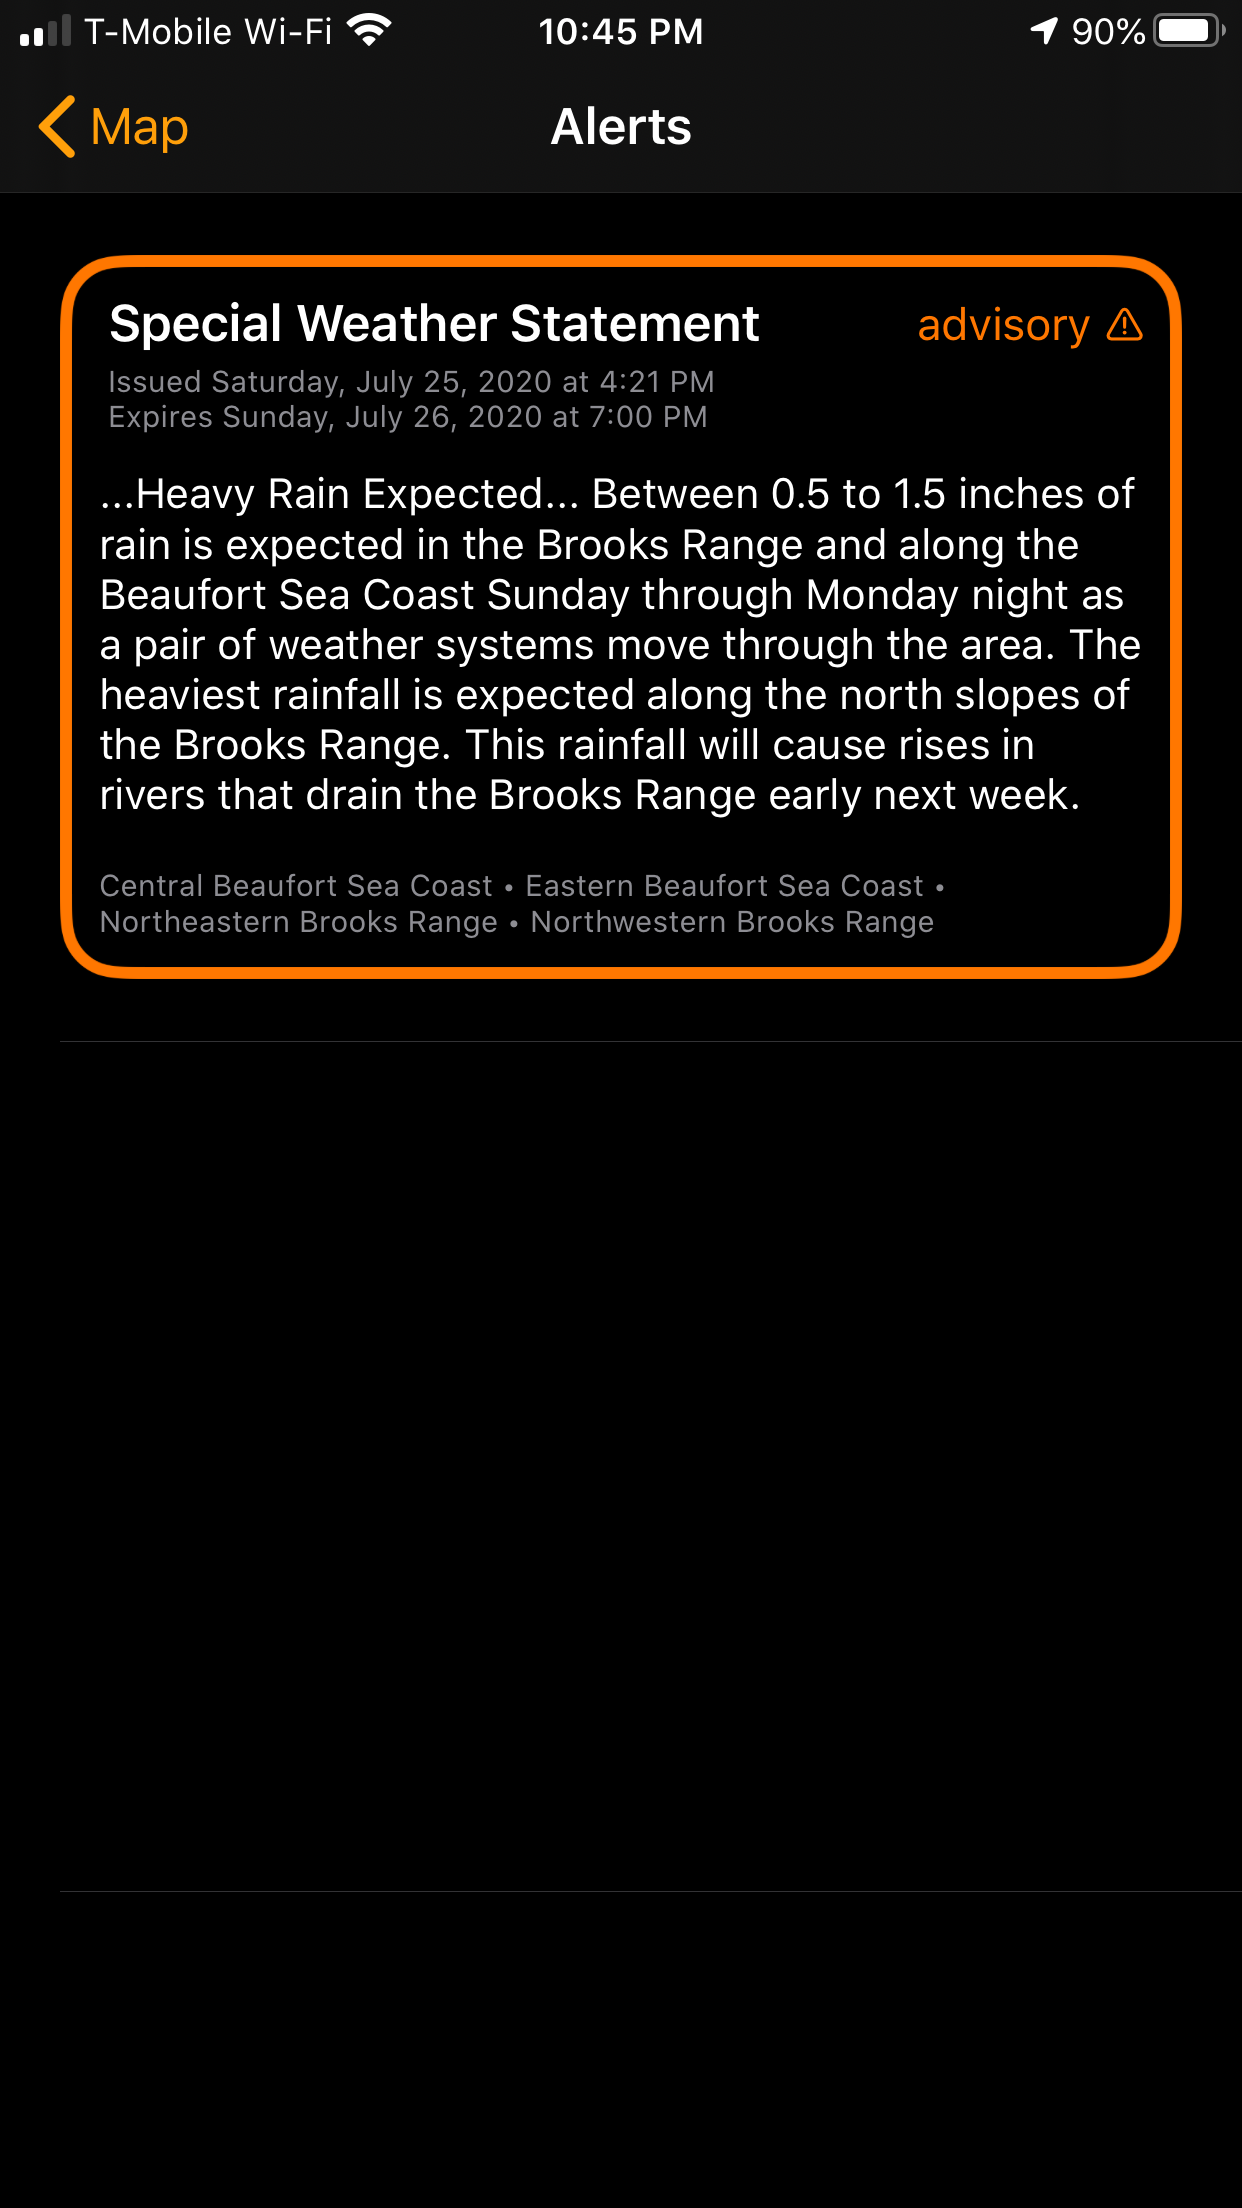 NWS Special Weather Statement, Coldfoot area